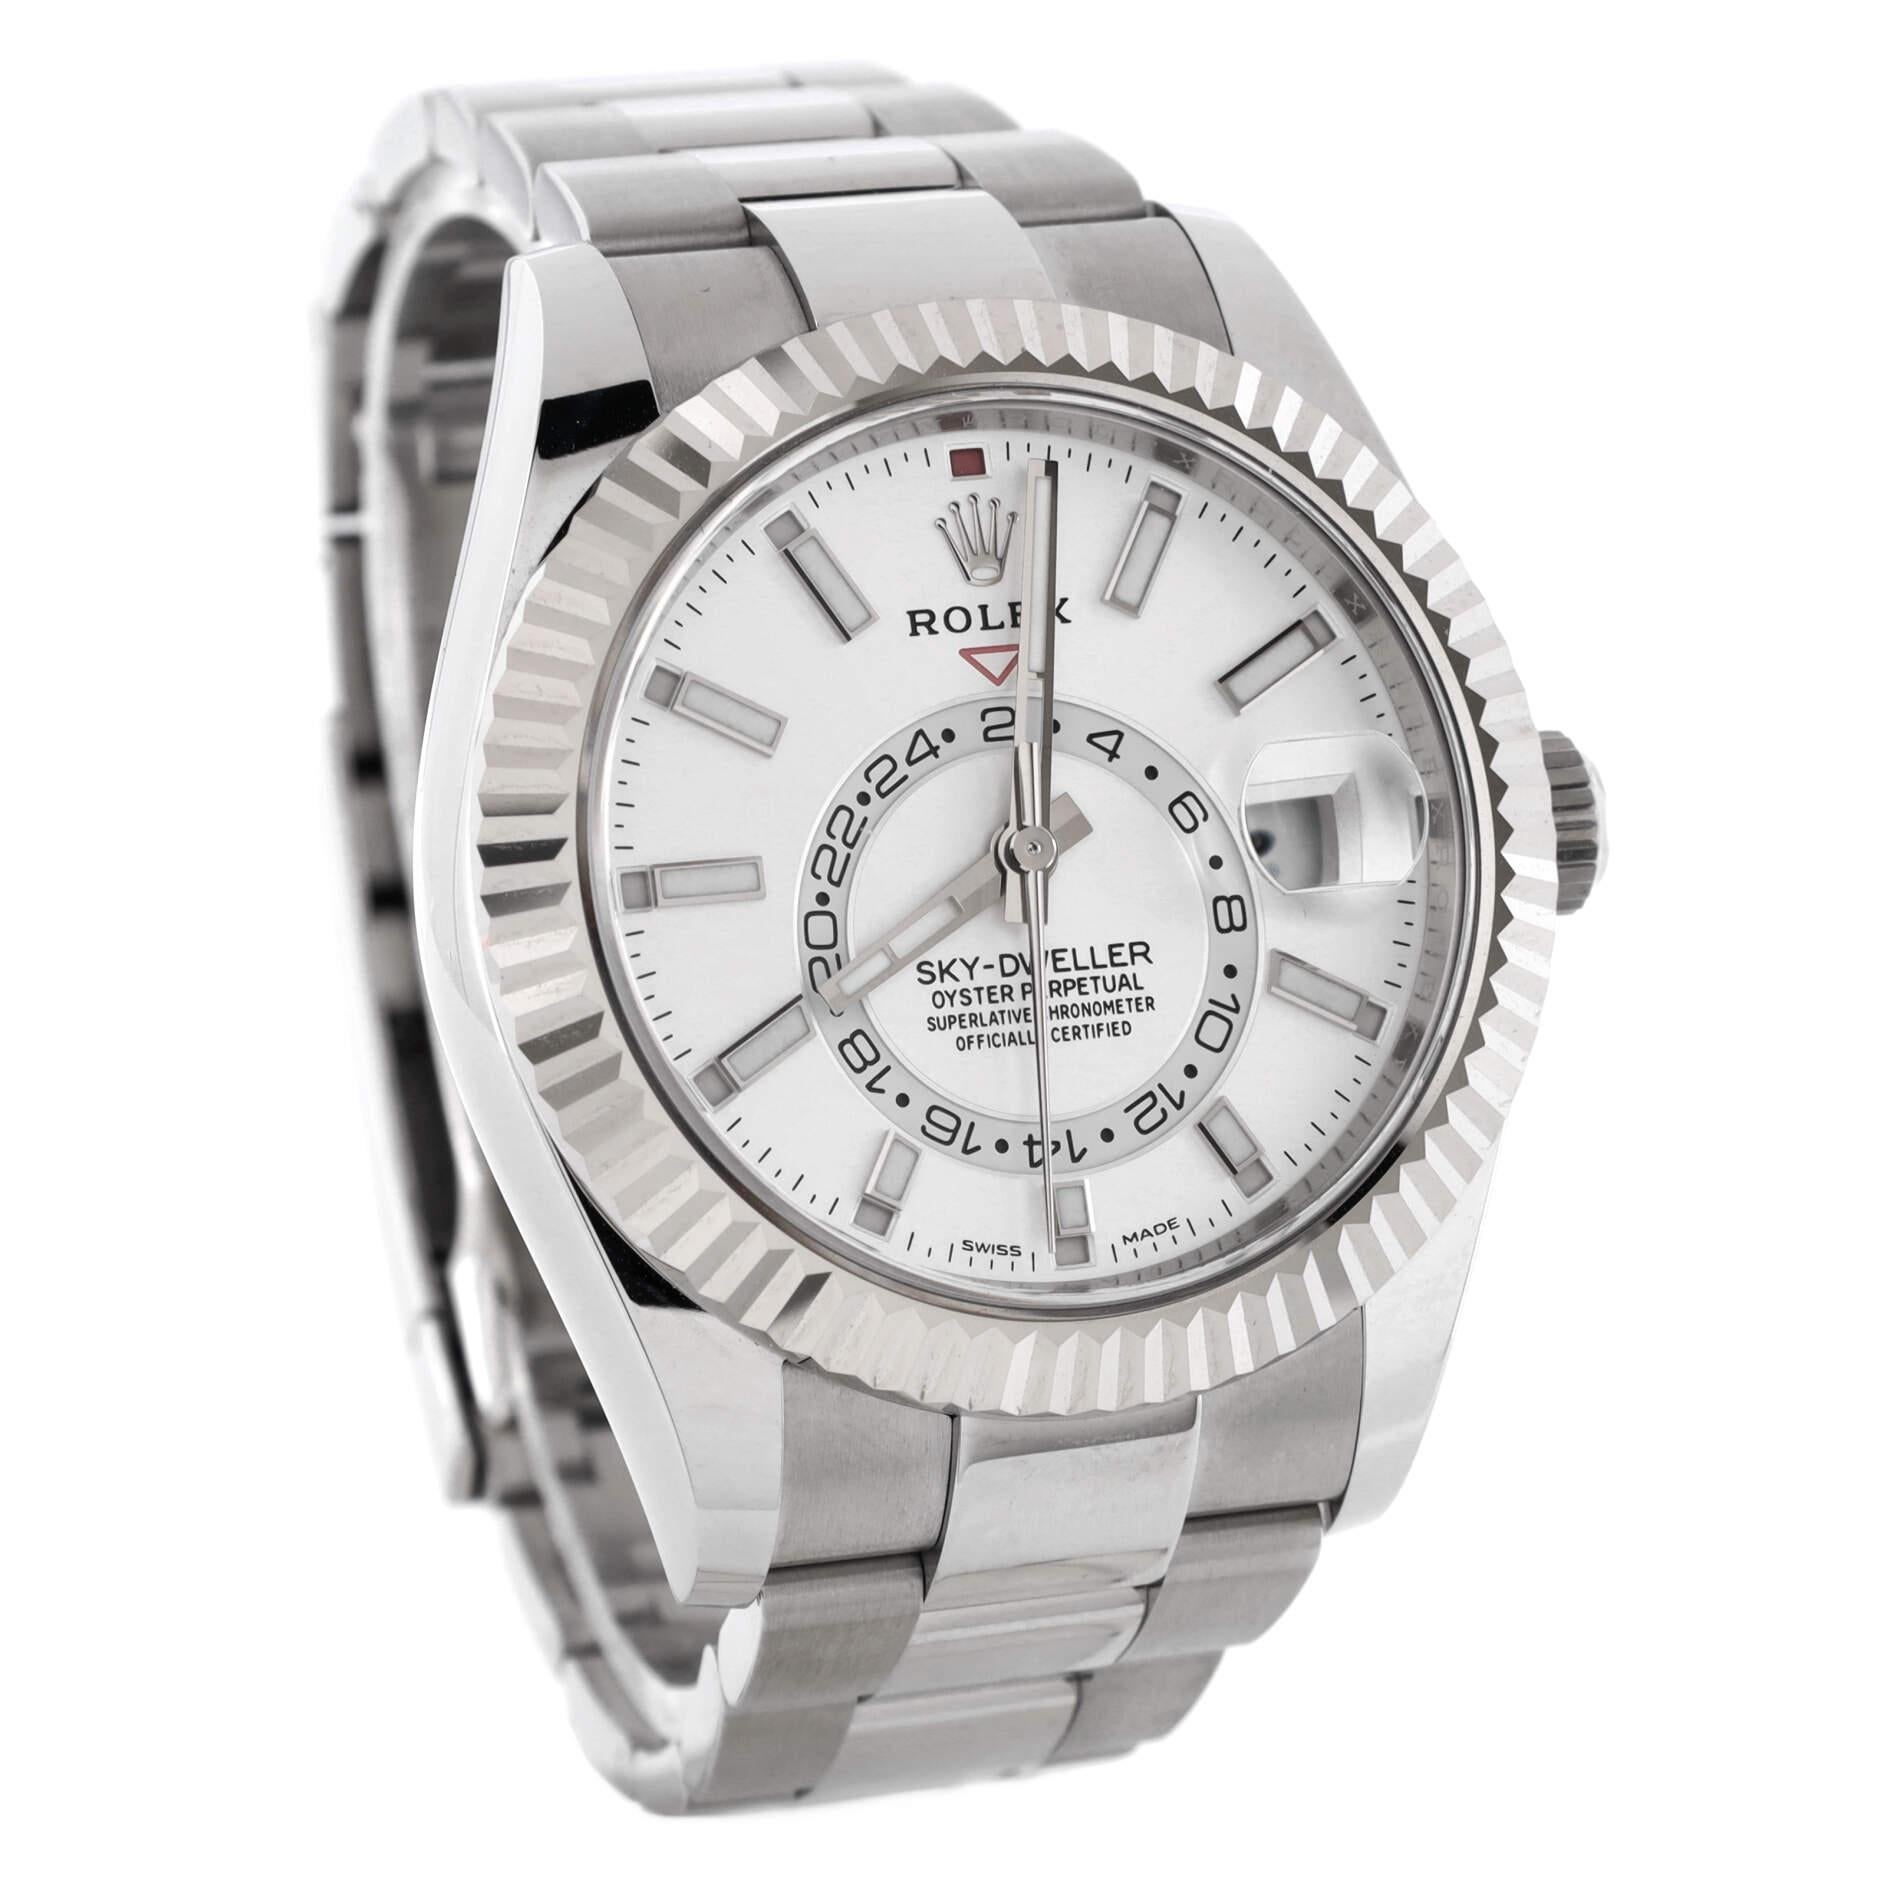 Rolex Sky-Dweller Oyster Perpetual Chronometer White Automatic Watch Stai In Good Condition For Sale In New York, NY